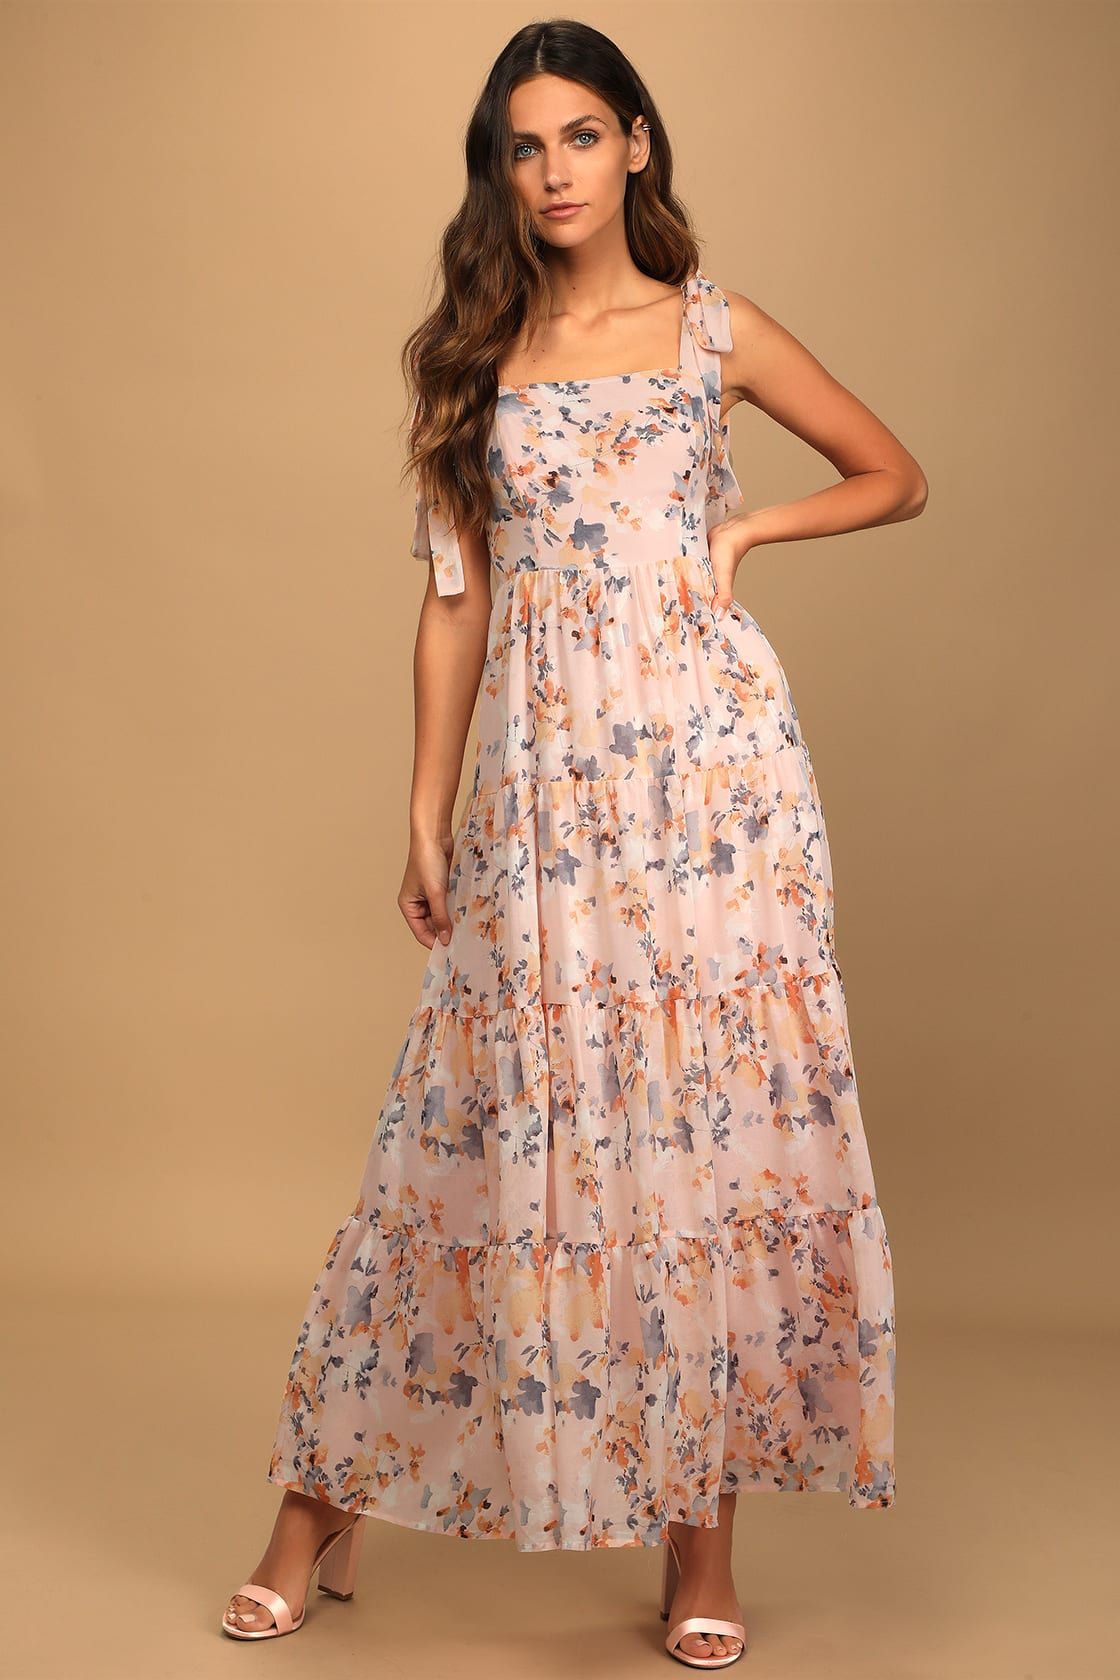 All Admiration Pink Floral Print Tie-Strap Tiered Maxi Dress | Lulus (US)